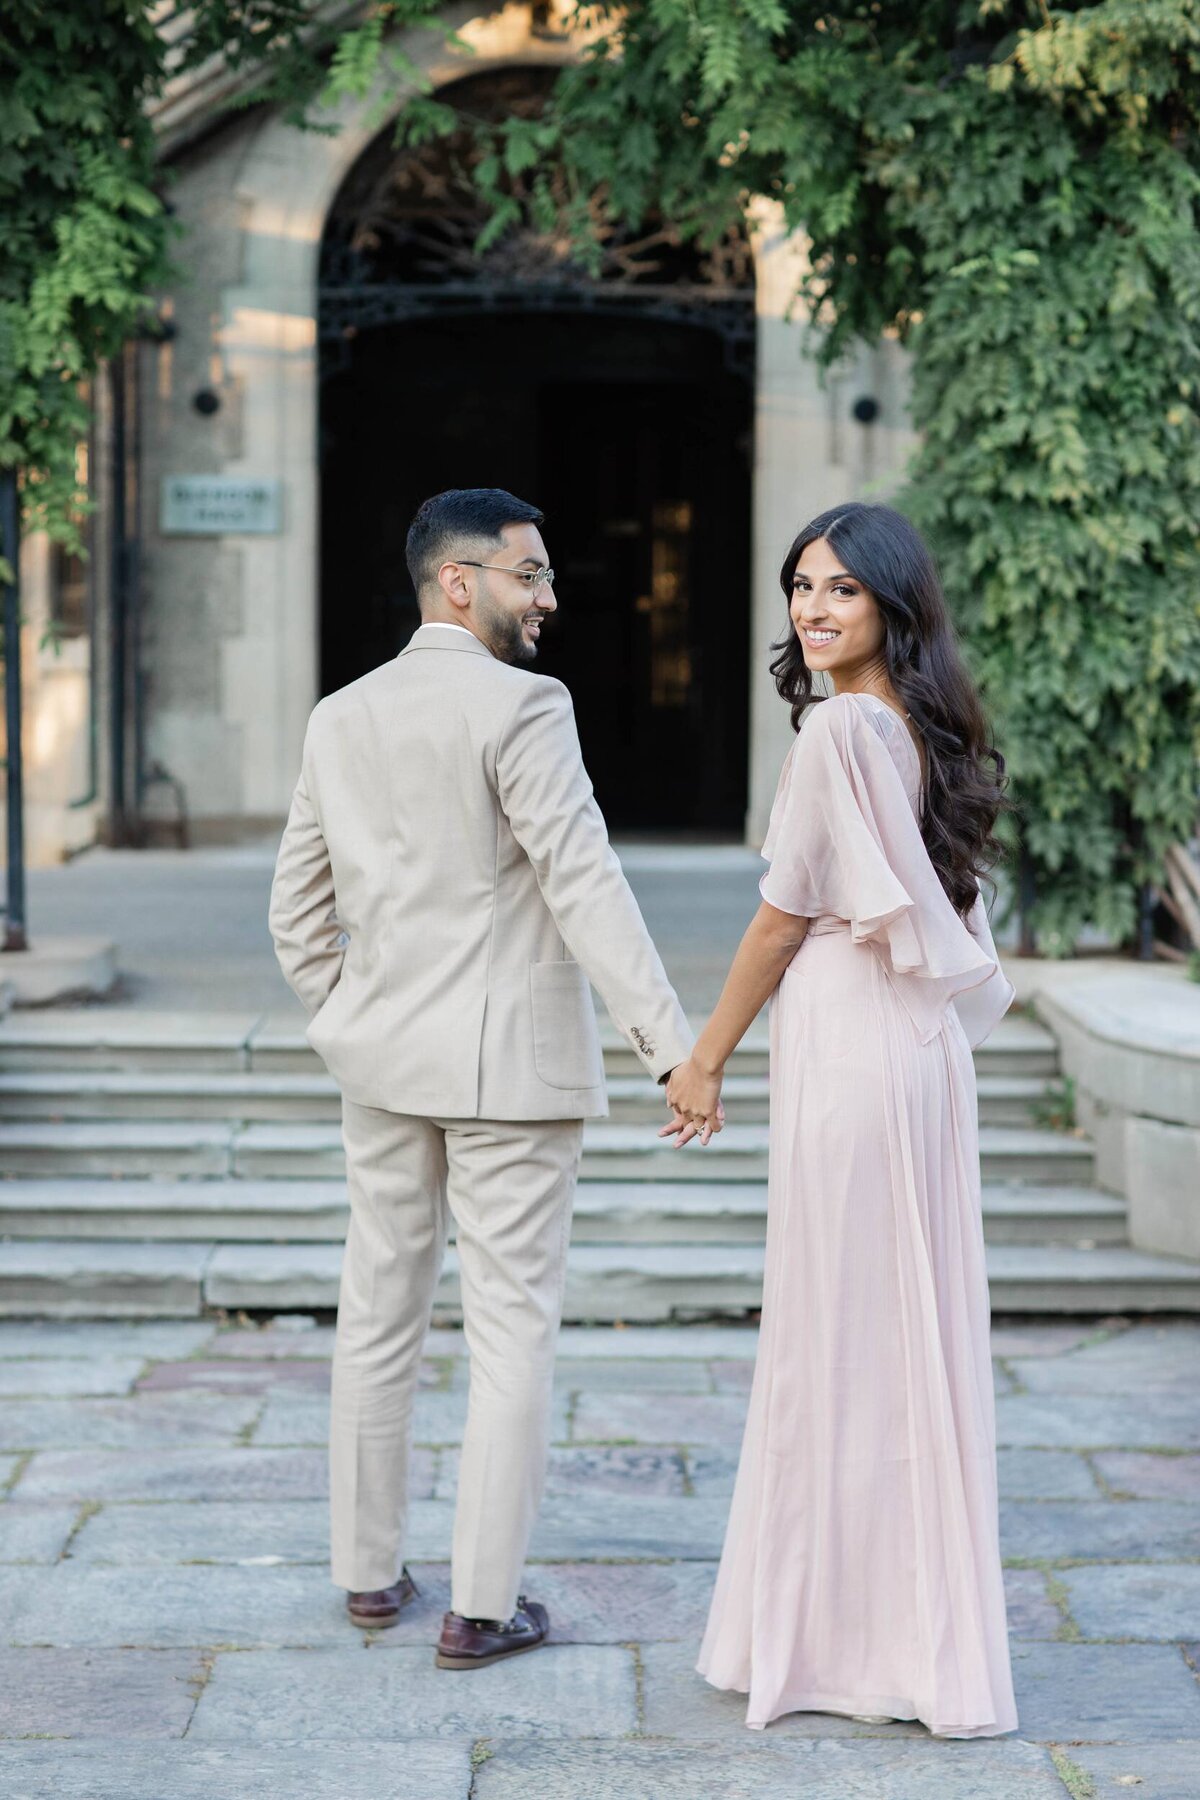 York-Glendon-Campus-Engagement-Photography-by-Azra_0009